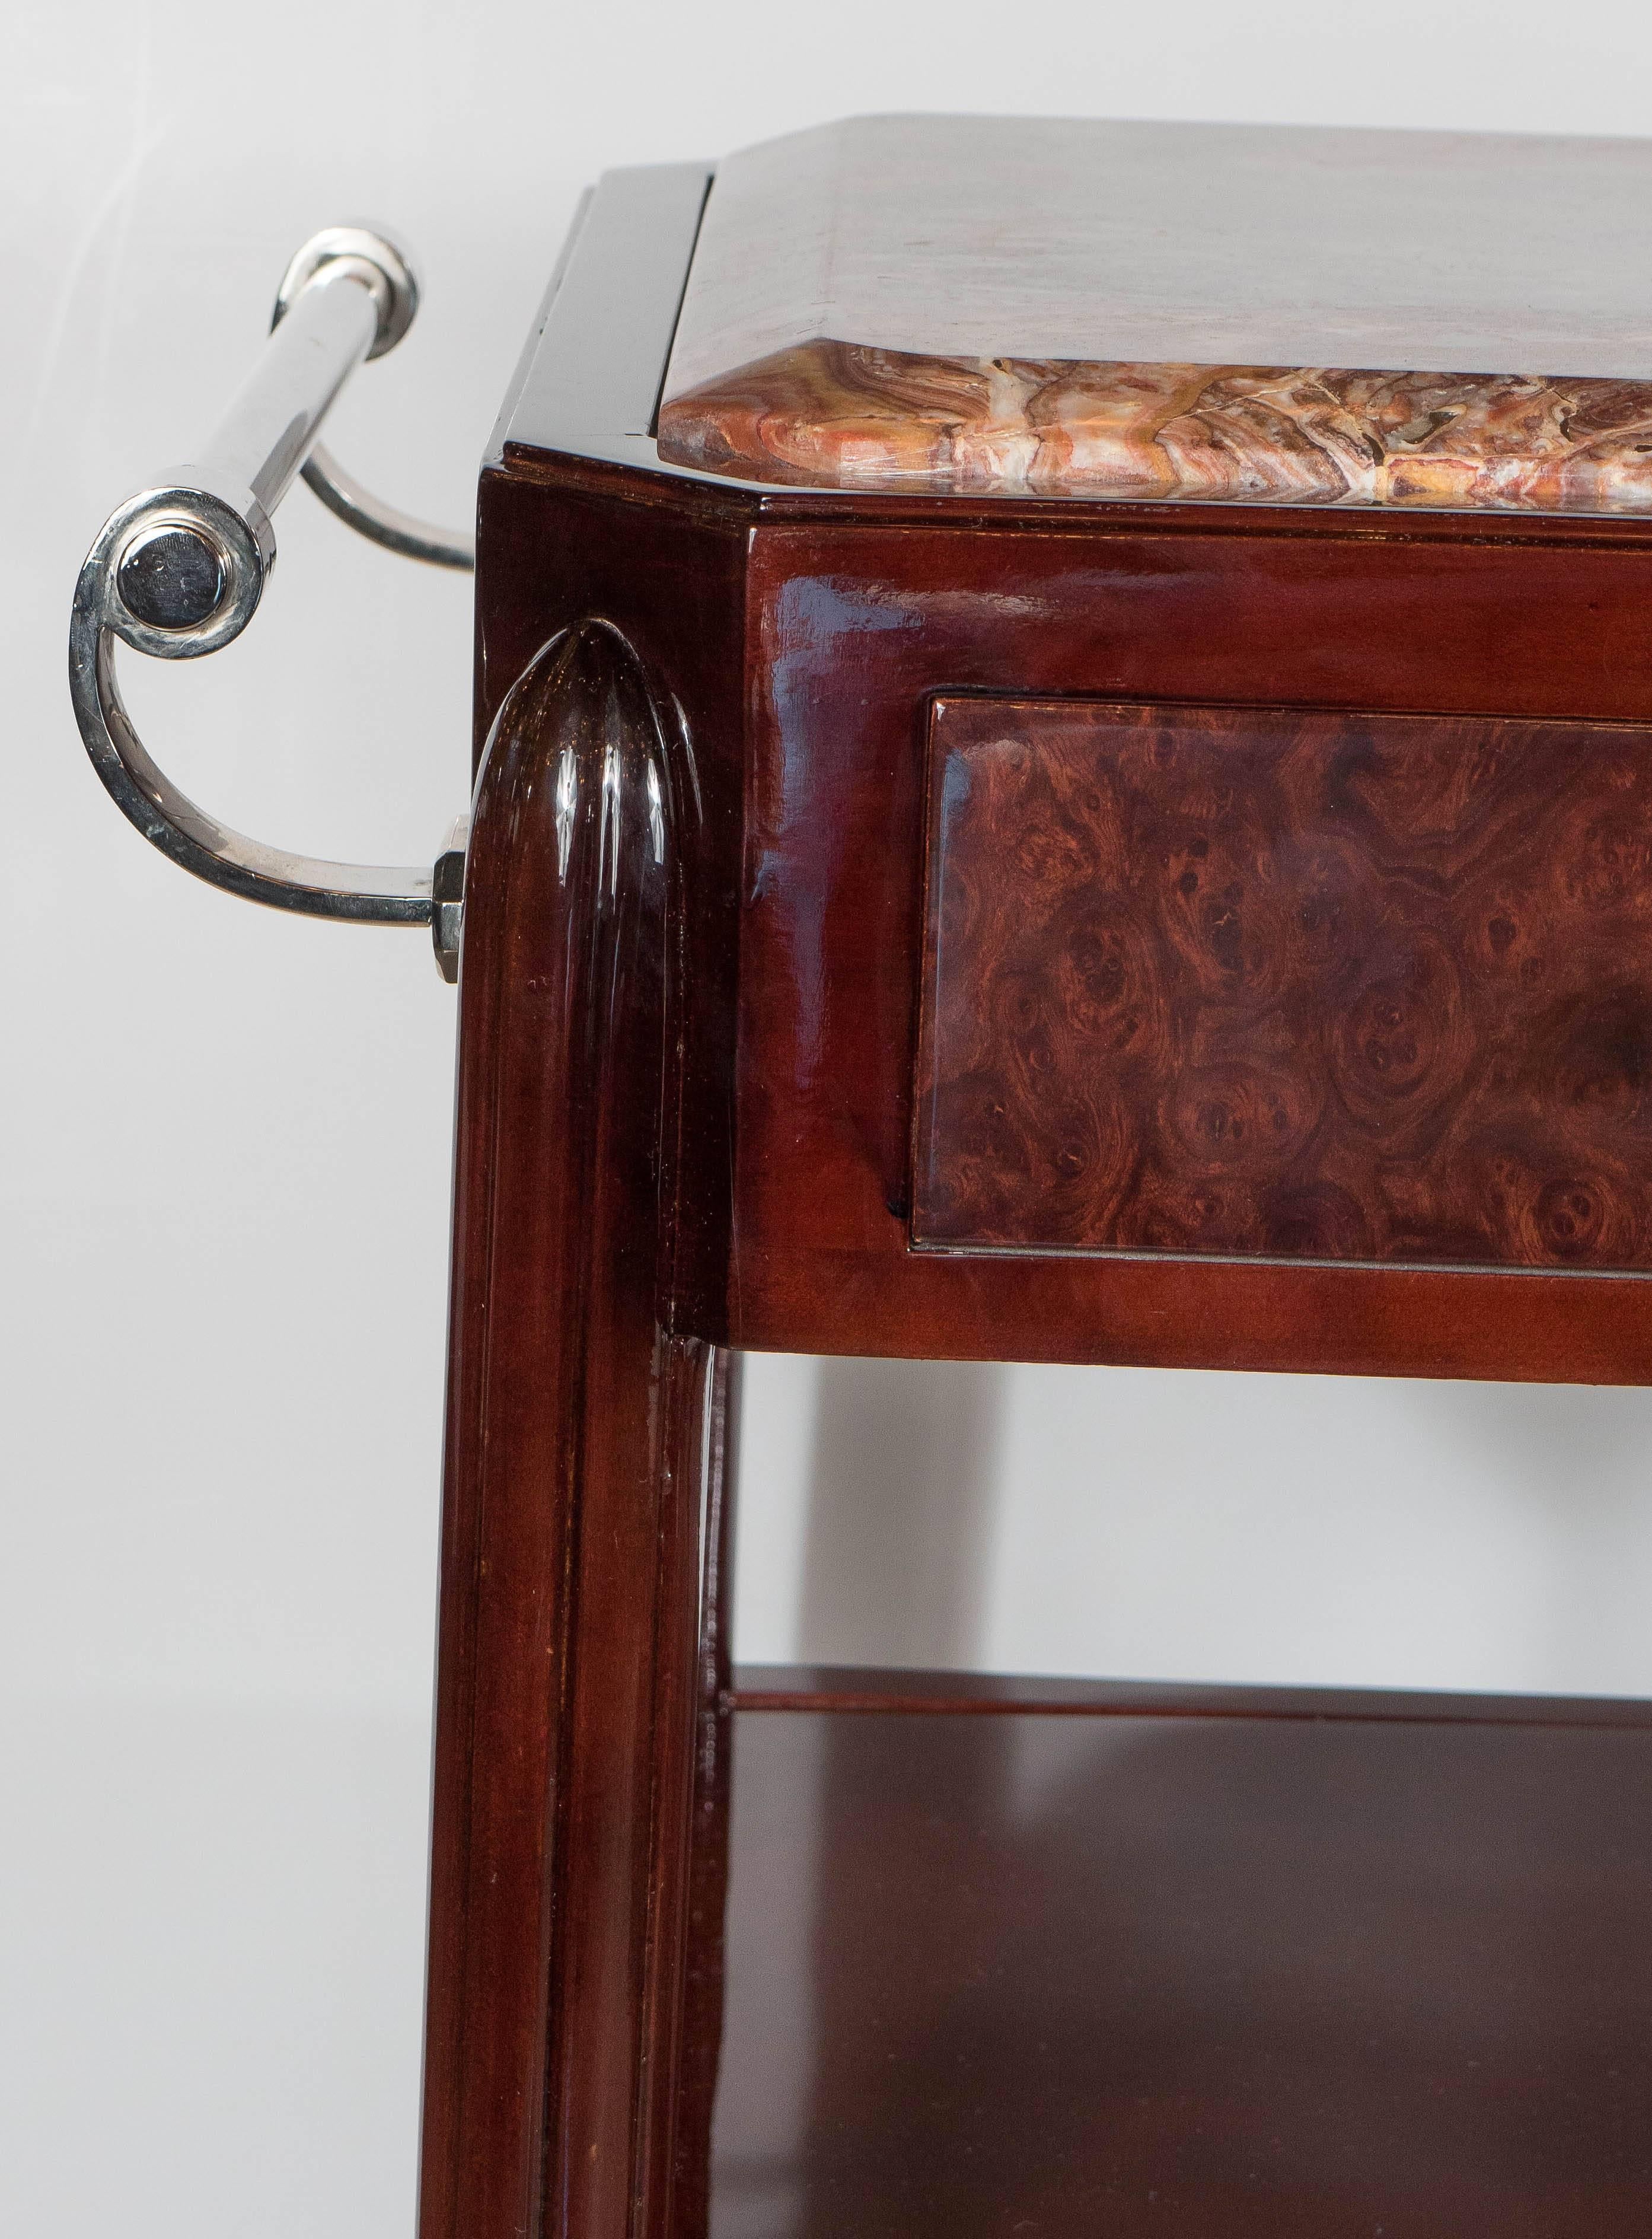 An exquisite Art Deco bar cart in  book-matched mahogany and a gorgeous inset rounded exotic onyx top. Nickel fittings adorn the drawers and side handrail. The drawer facades are of burled amboyna wood on both sides. Three levels give this piece